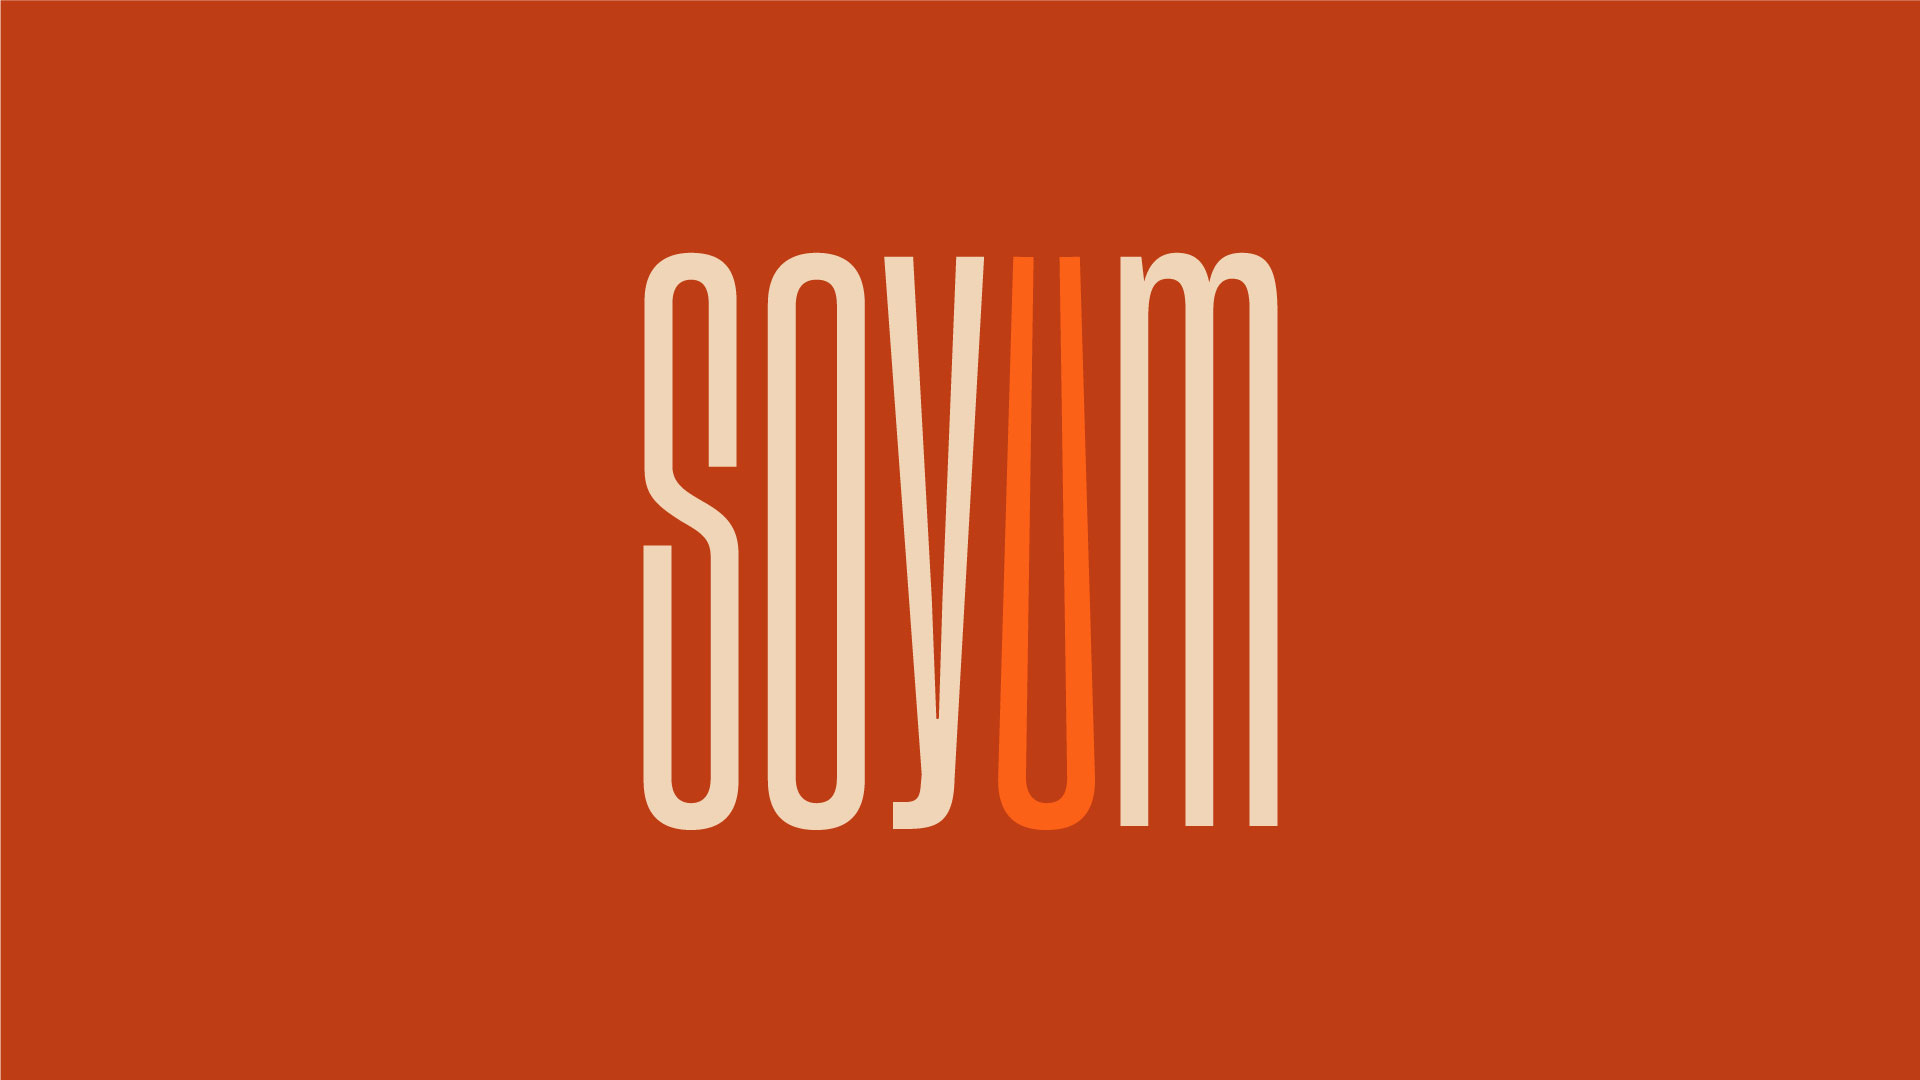 Soyum logo centered against a red background